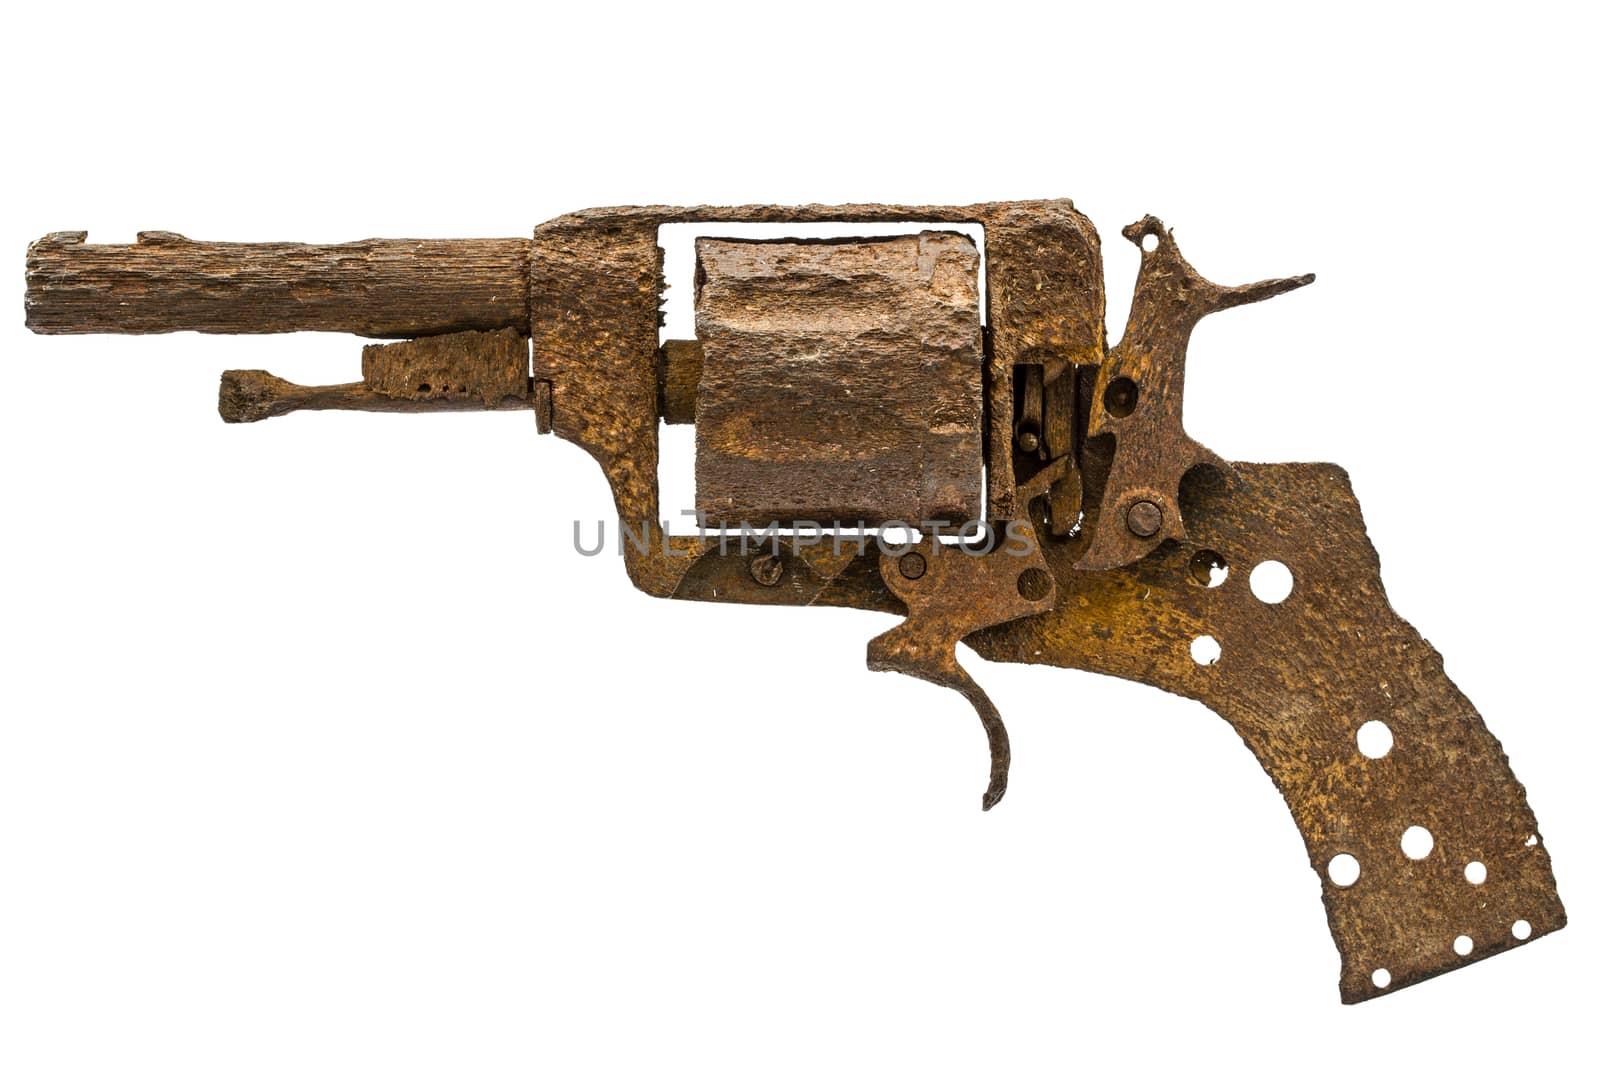 Old rusty pistol, Isolated on white background by kostiuchenko